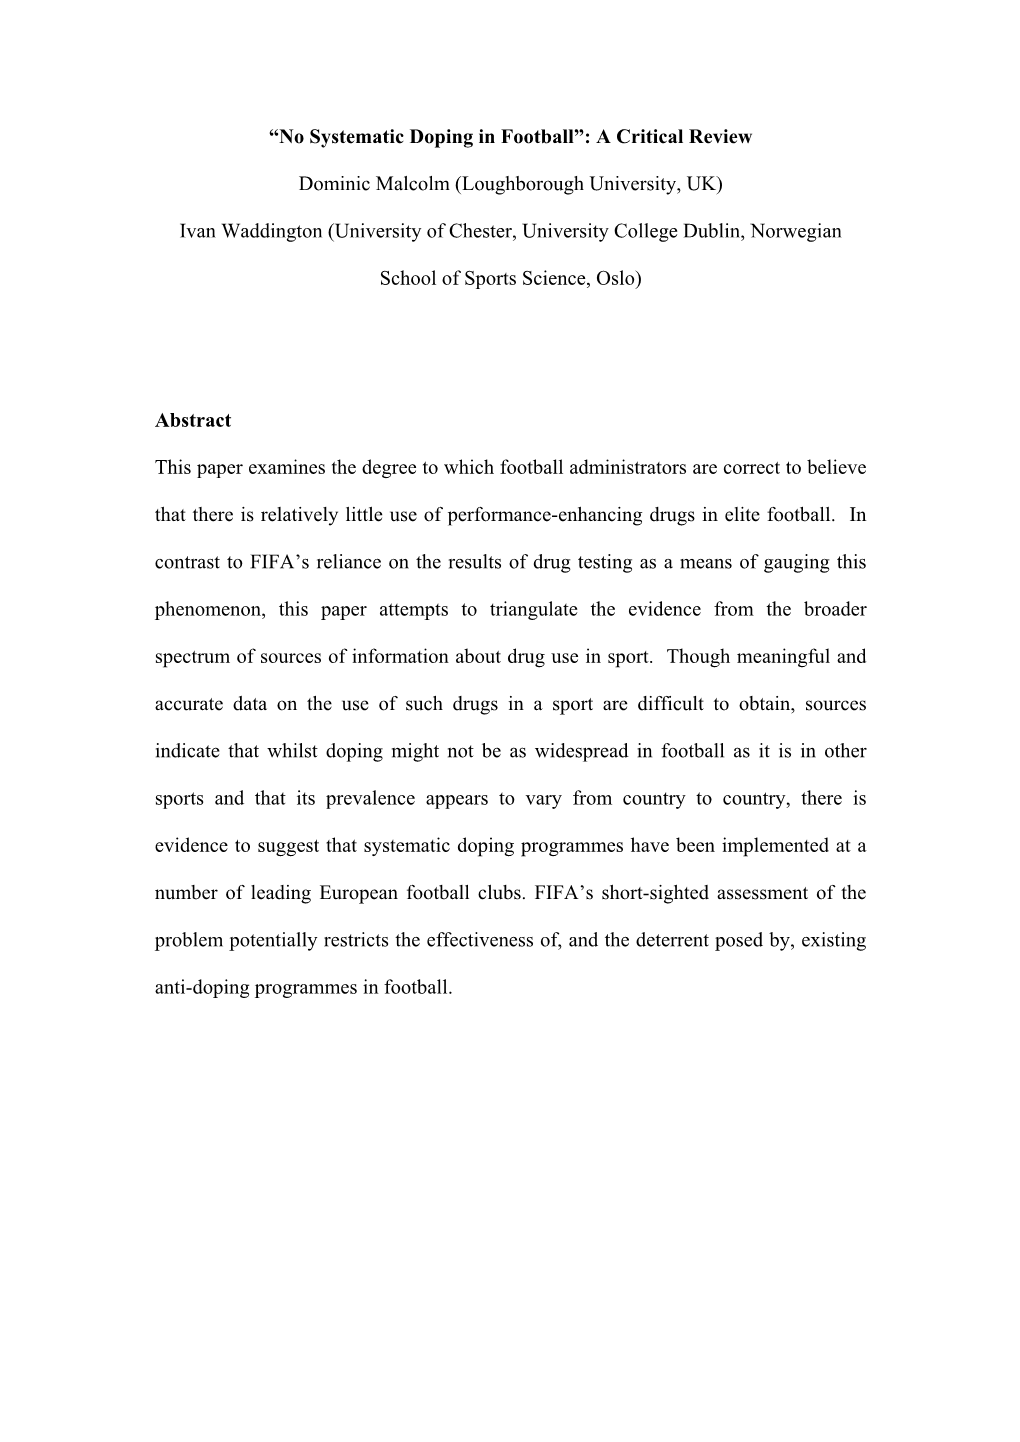 No Systematic Doping in Football”: a Critical Review